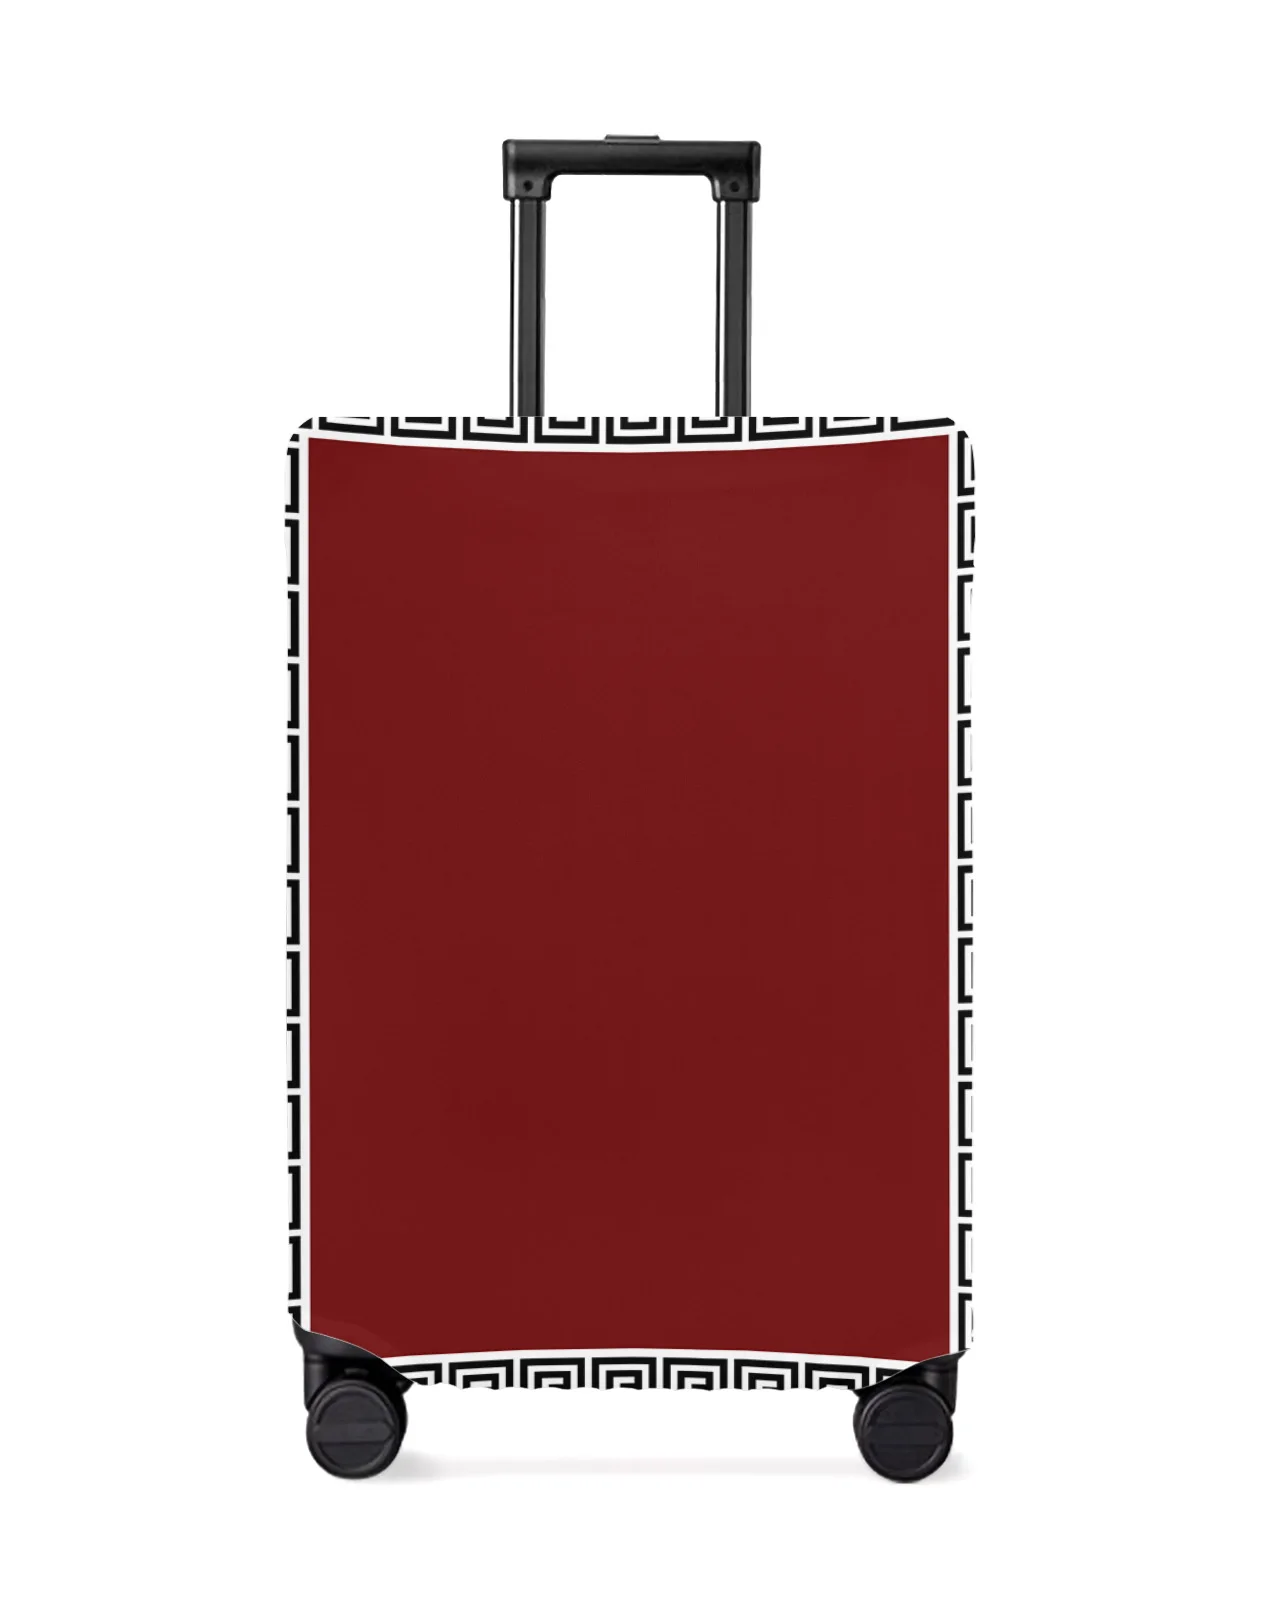 red-geometric-greek-geometric-luggage-cover-stretch-suitcase-protector-baggage-dust-cover-for-18-32-inch-travel-suitcase-case